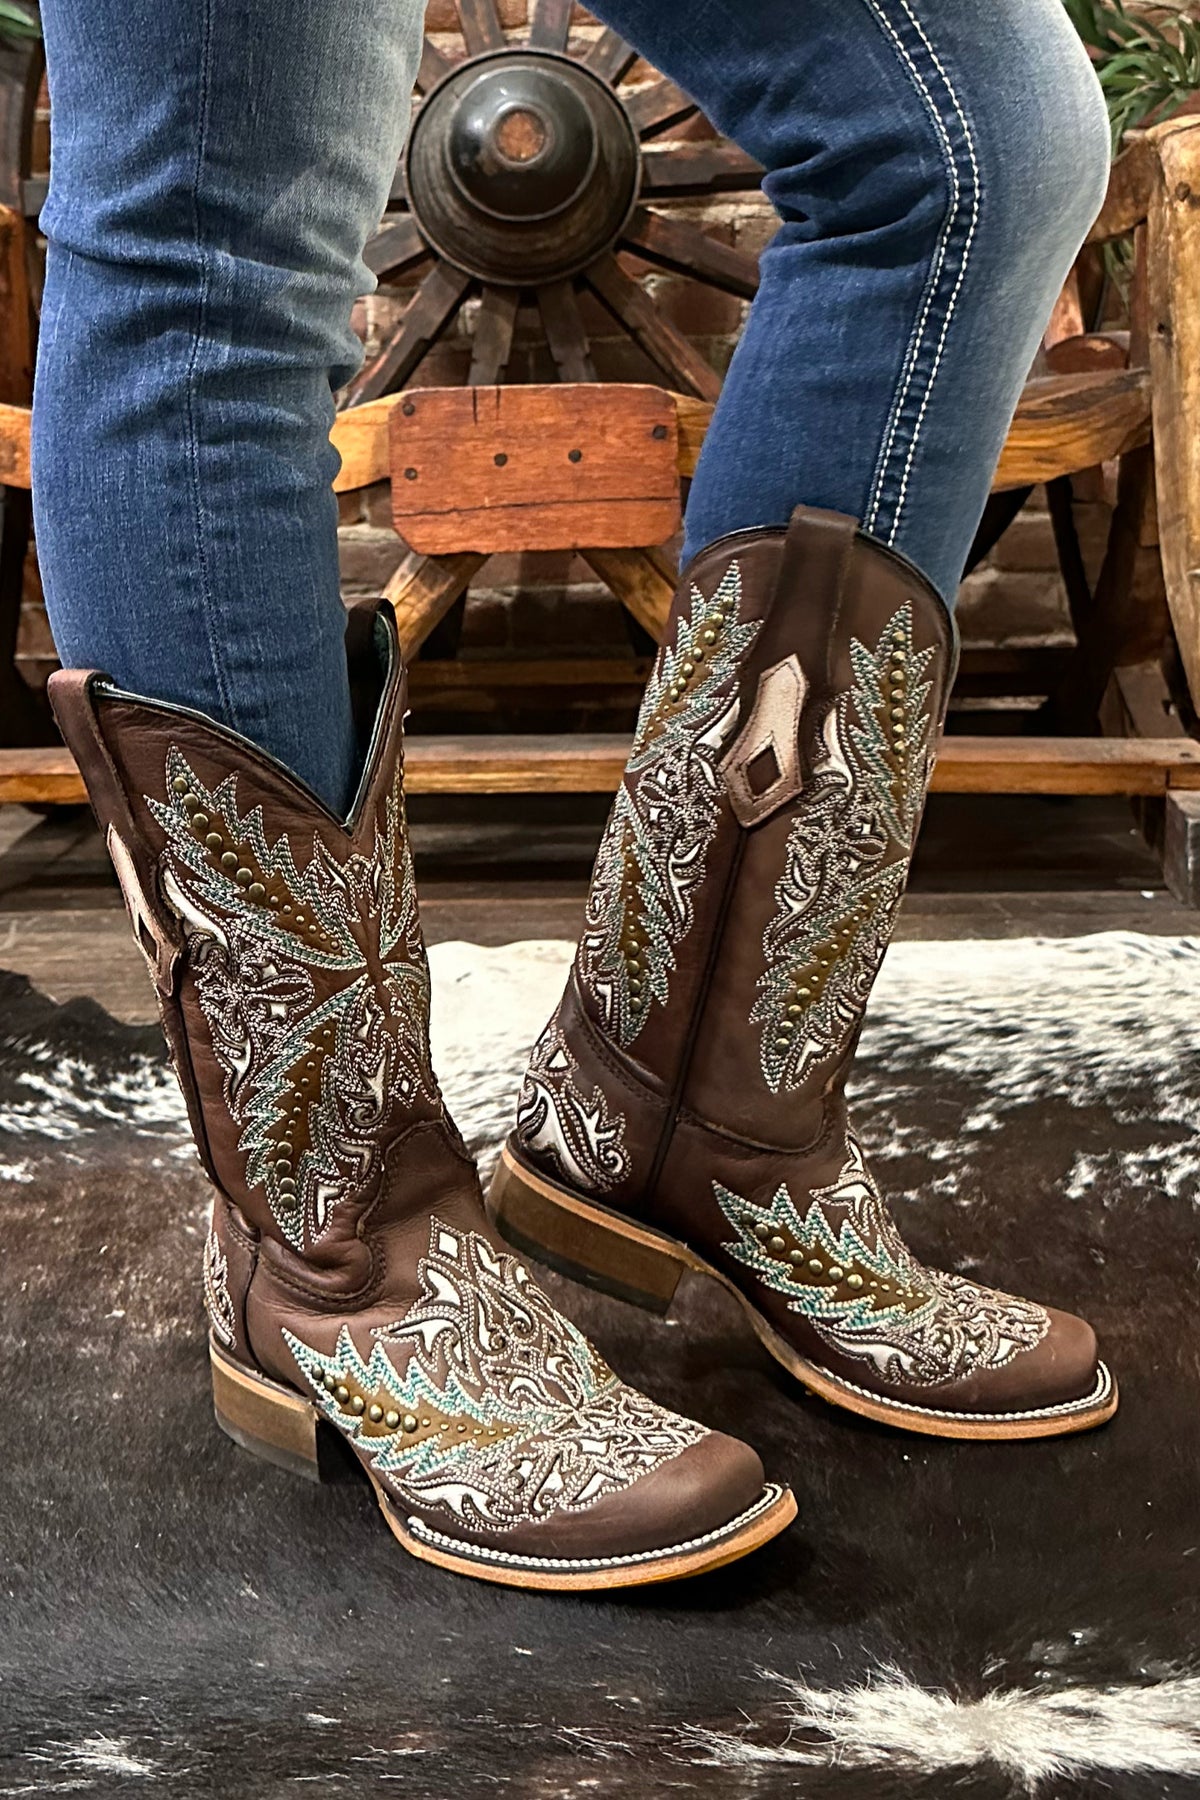 Ladies Brown Embroidered Square Toe Boot with Studs by Corral Boots-Women's Boot-Corral Boots-Gallop 'n Glitz- Women's Western Wear Boutique, Located in Grants Pass, Oregon